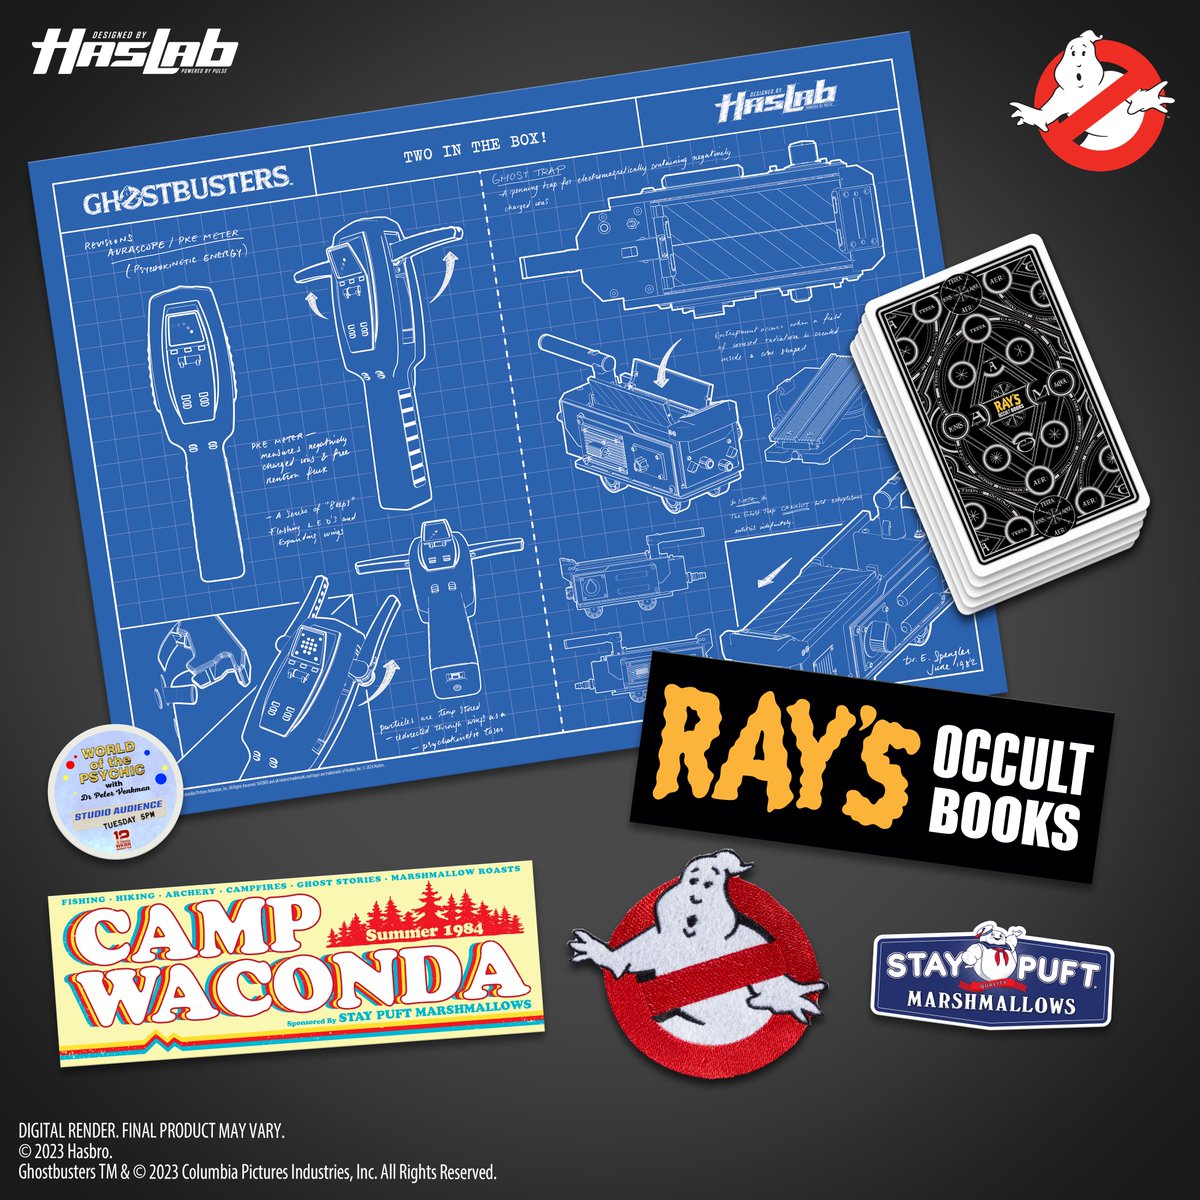 #Ghostbusters fans, we’ve secured the Supernatural Startup Unlock! You've unlocked a set of 5 ESP flashcards, #GhostTrap and #PKEMeter blueprint poster, sticker sheet, and a No Ghost patch for the shoulder of your flight suit! Let’s keep going and bust those other unlocks!